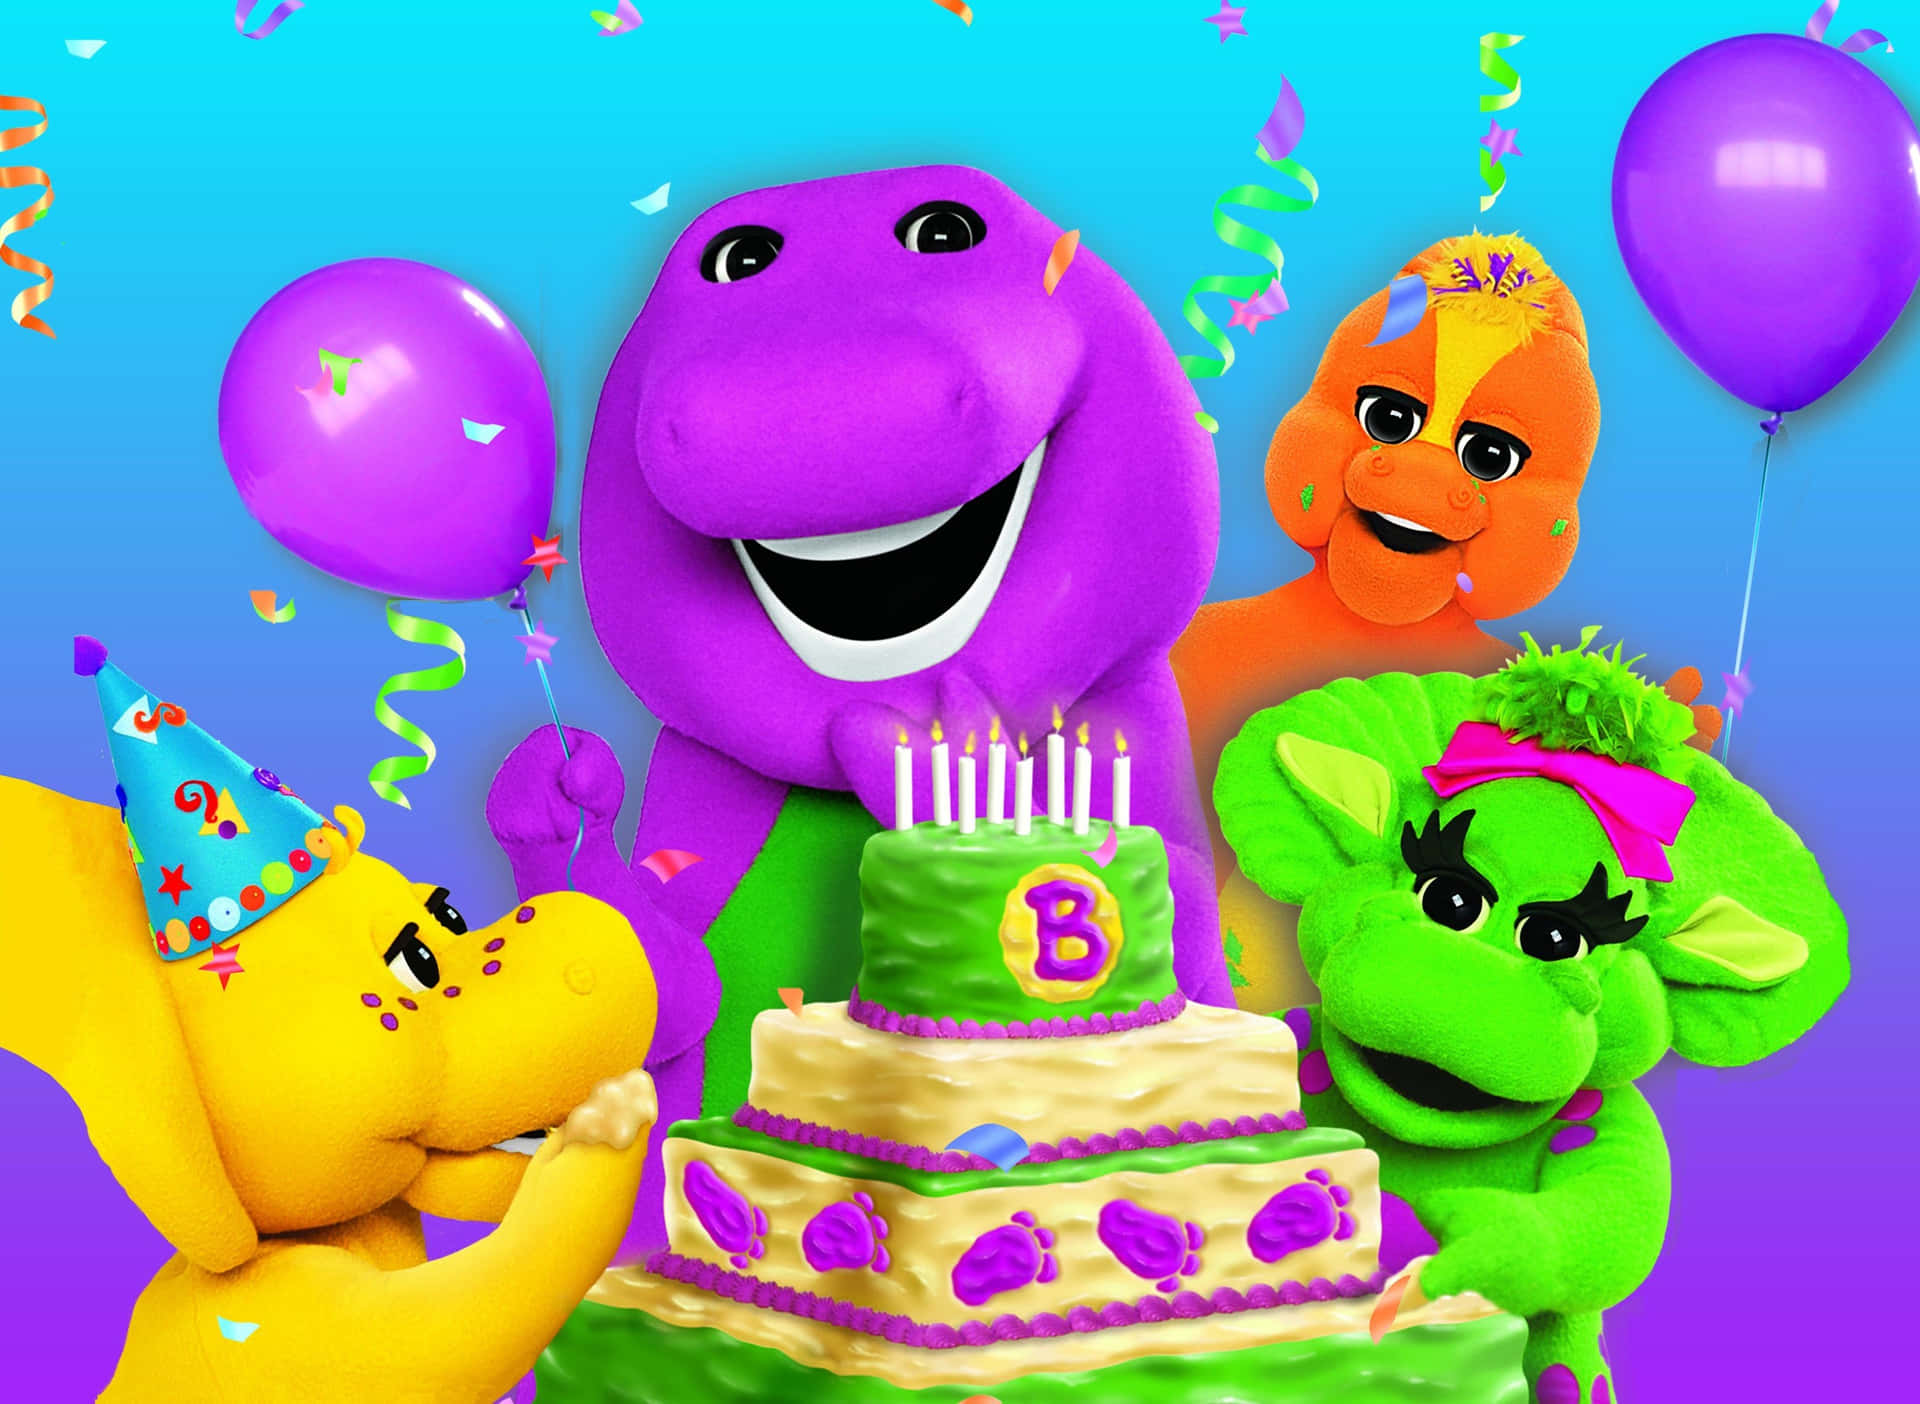 Barney the Dinosaur sharing smiles with kids Wallpaper